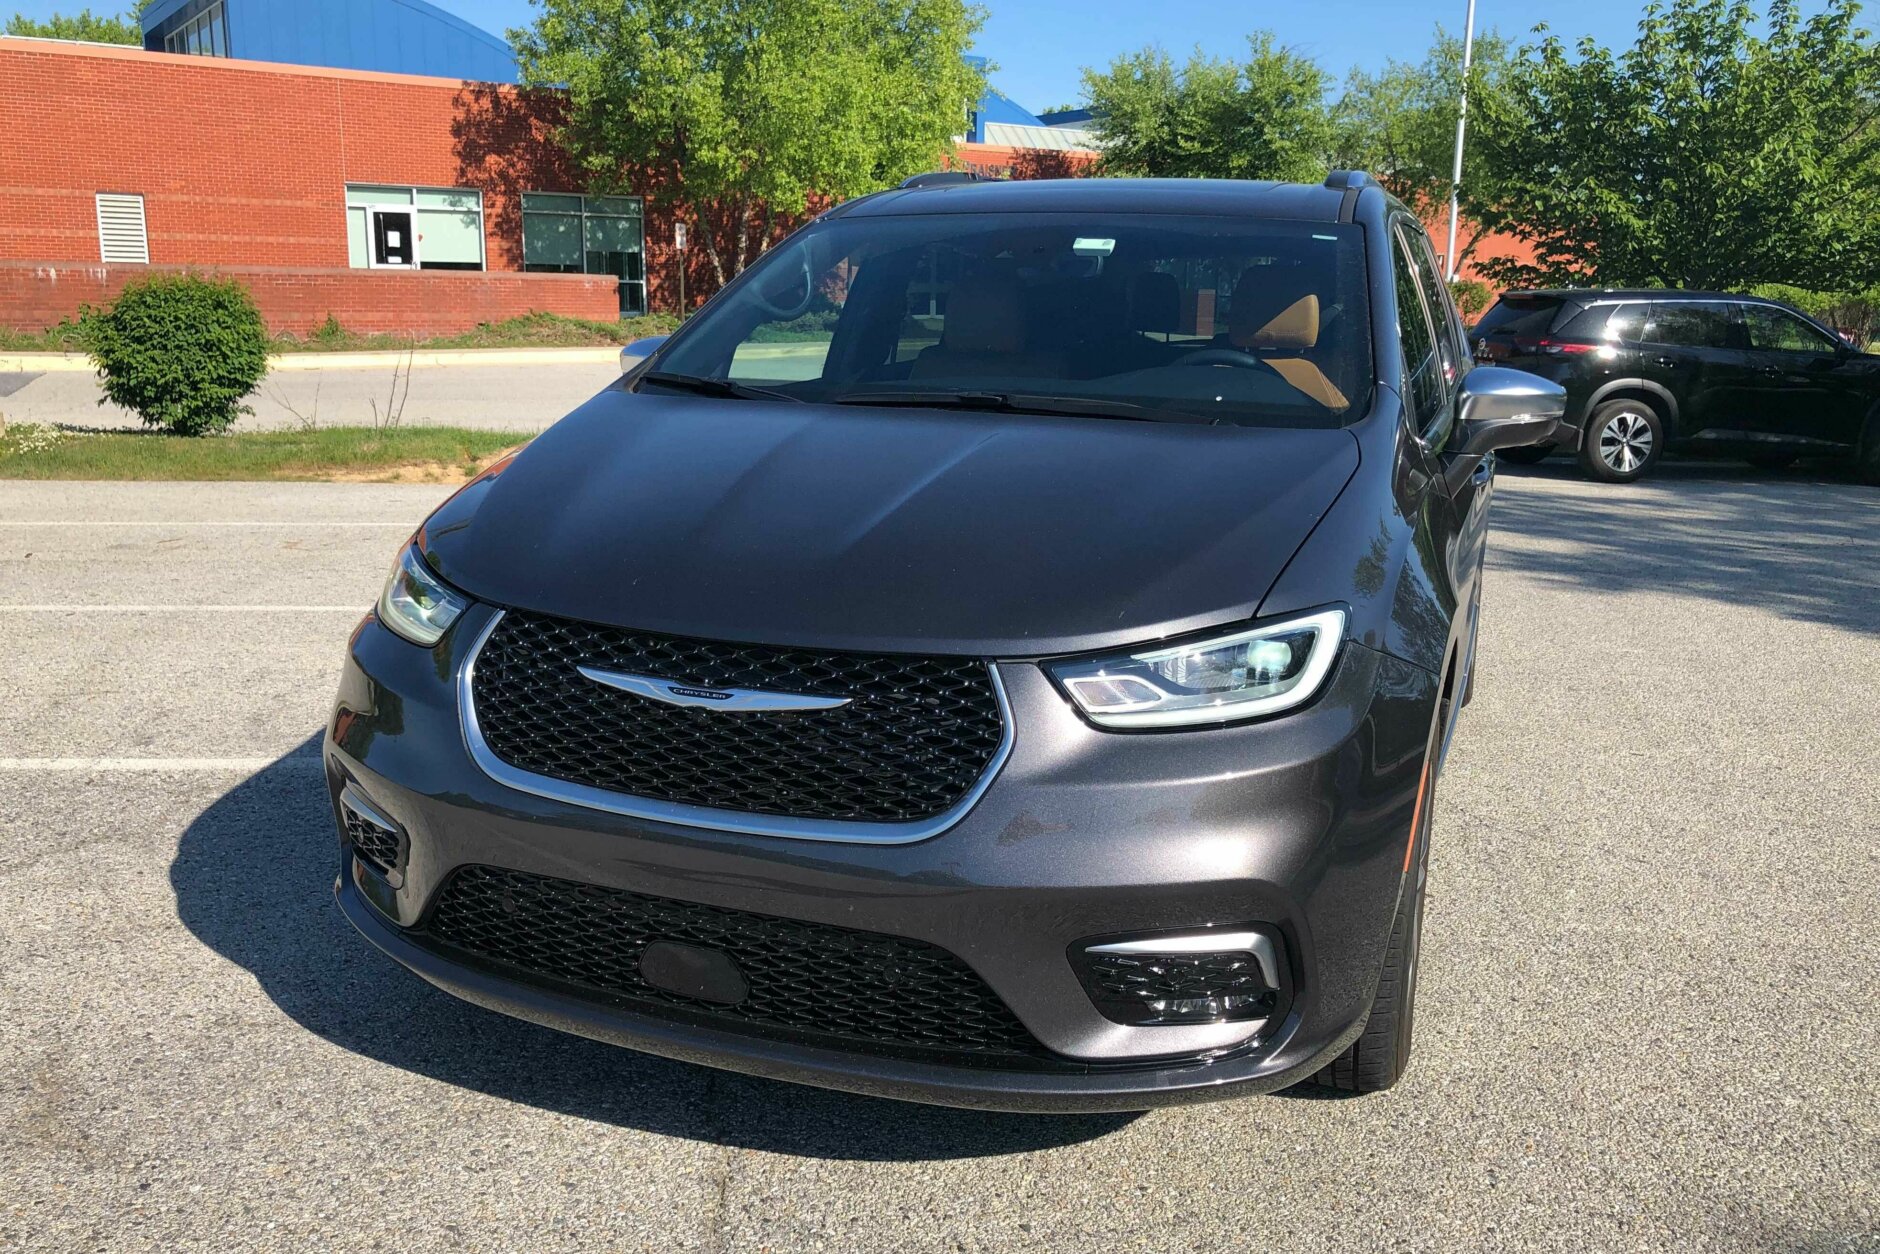 <p>Another week and yet another minivan. This time it is the latest from Chrysler.</p>
